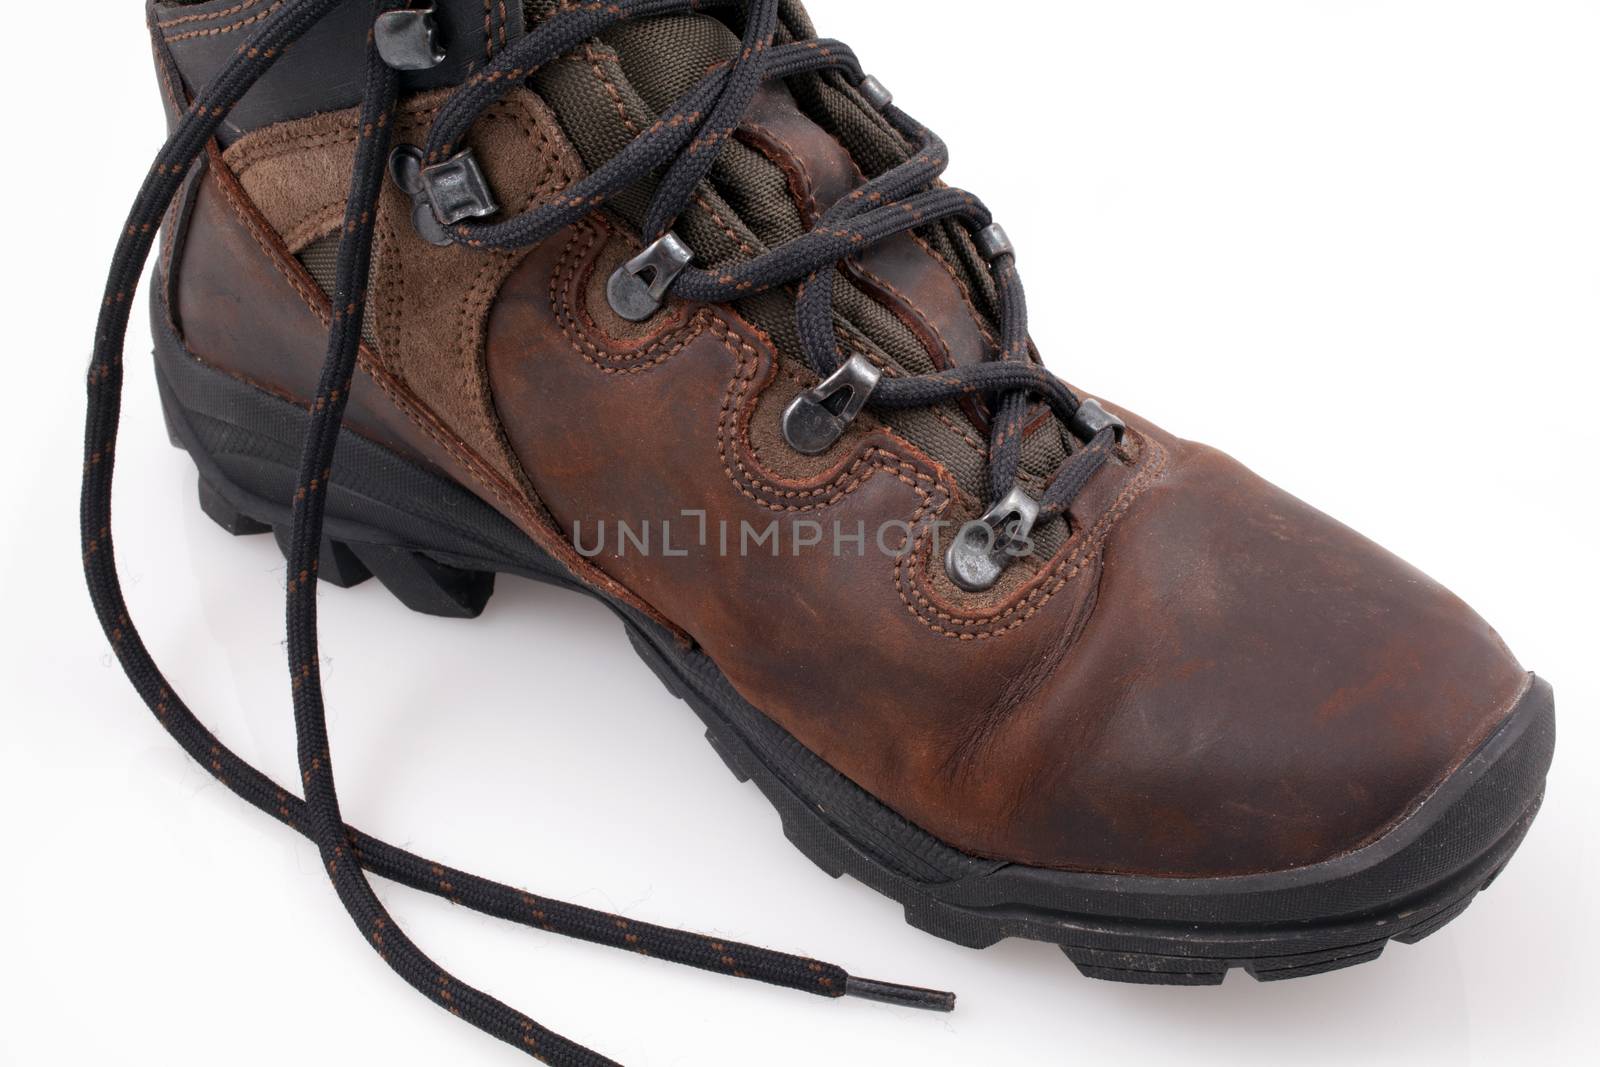 Mountain boots on white background